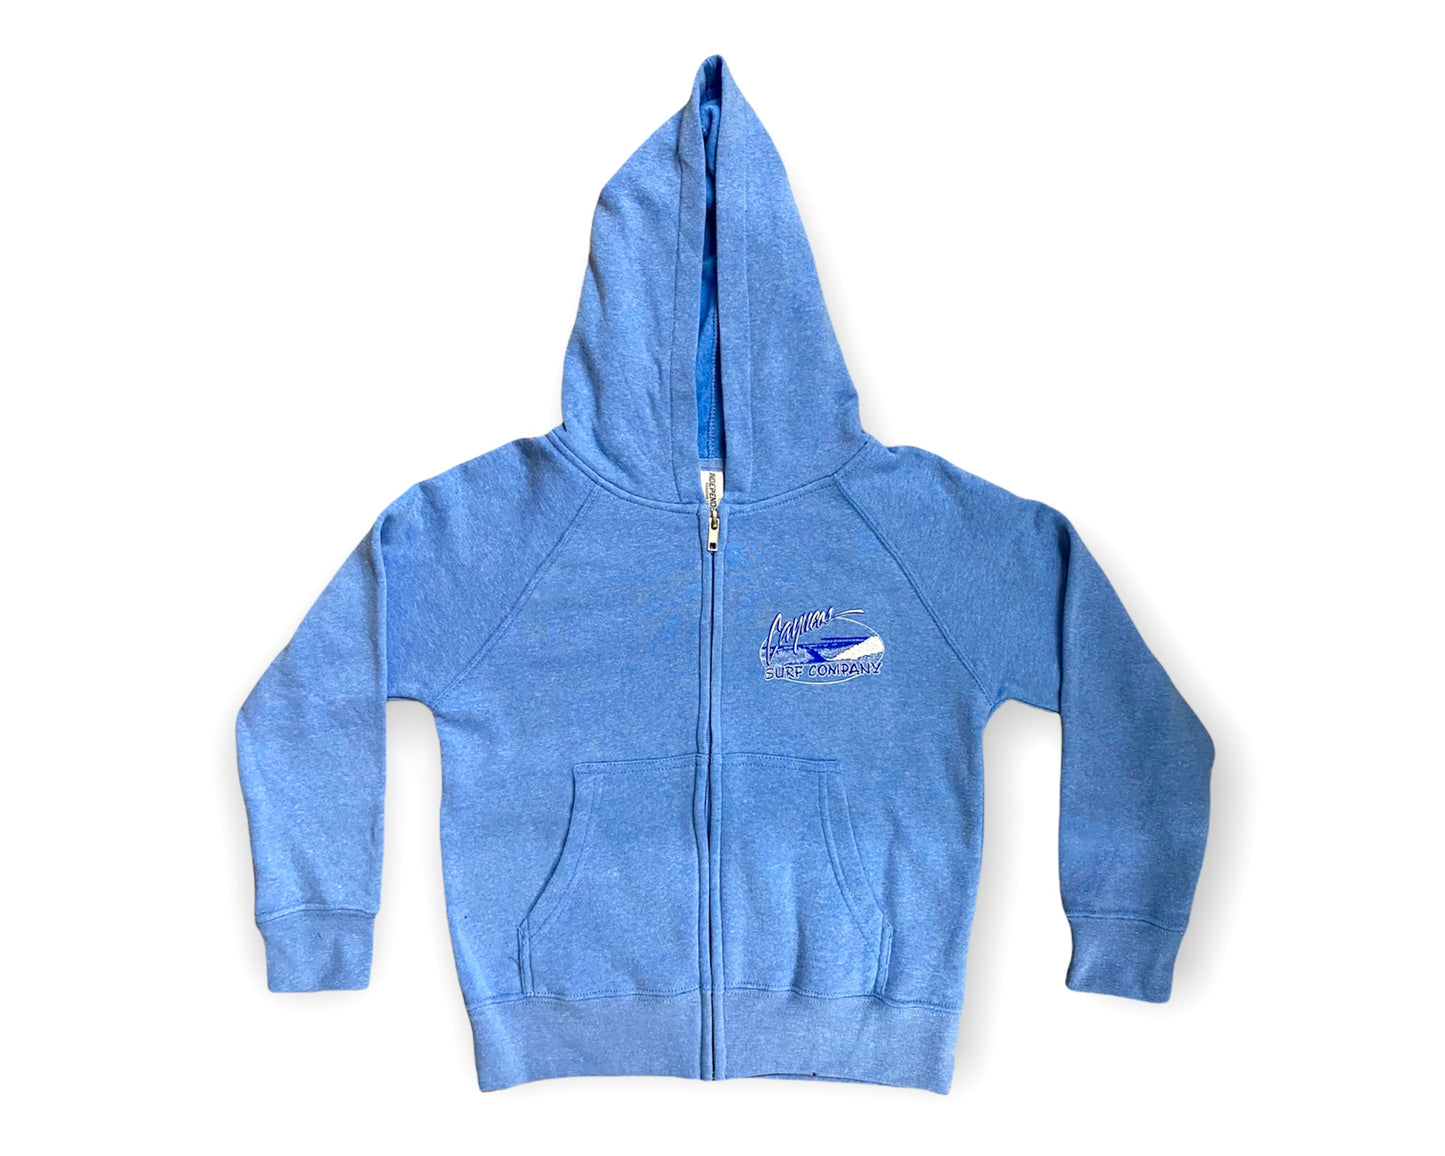 Cayucos Toddler New/Old Pier Zip Up